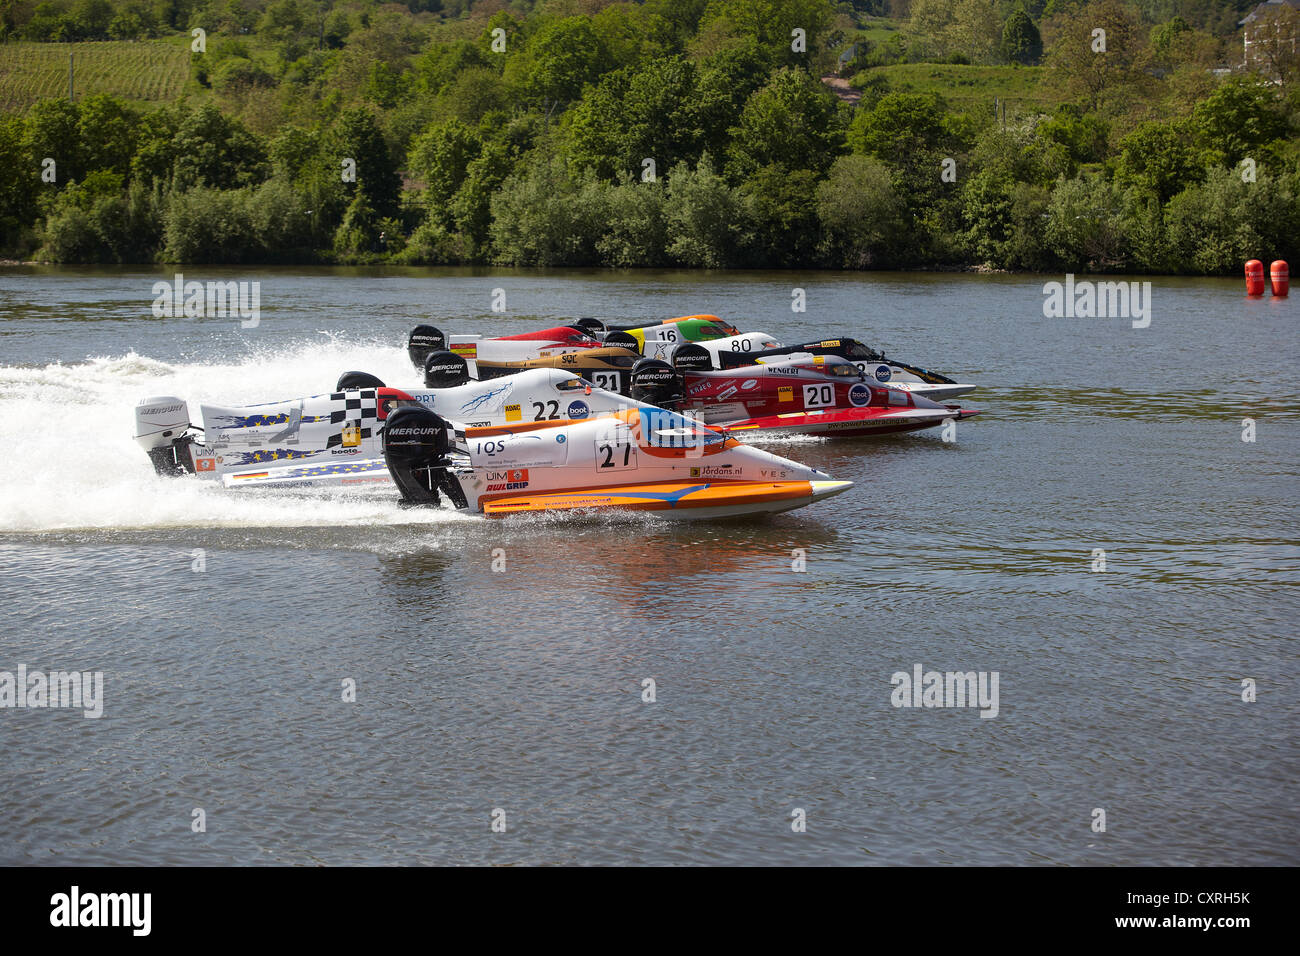 ADAC, German automobile club, motor boat race on the Moselle River near Brodenbach, Rhineland-Palatinate, Germany, Europe Stock Photo